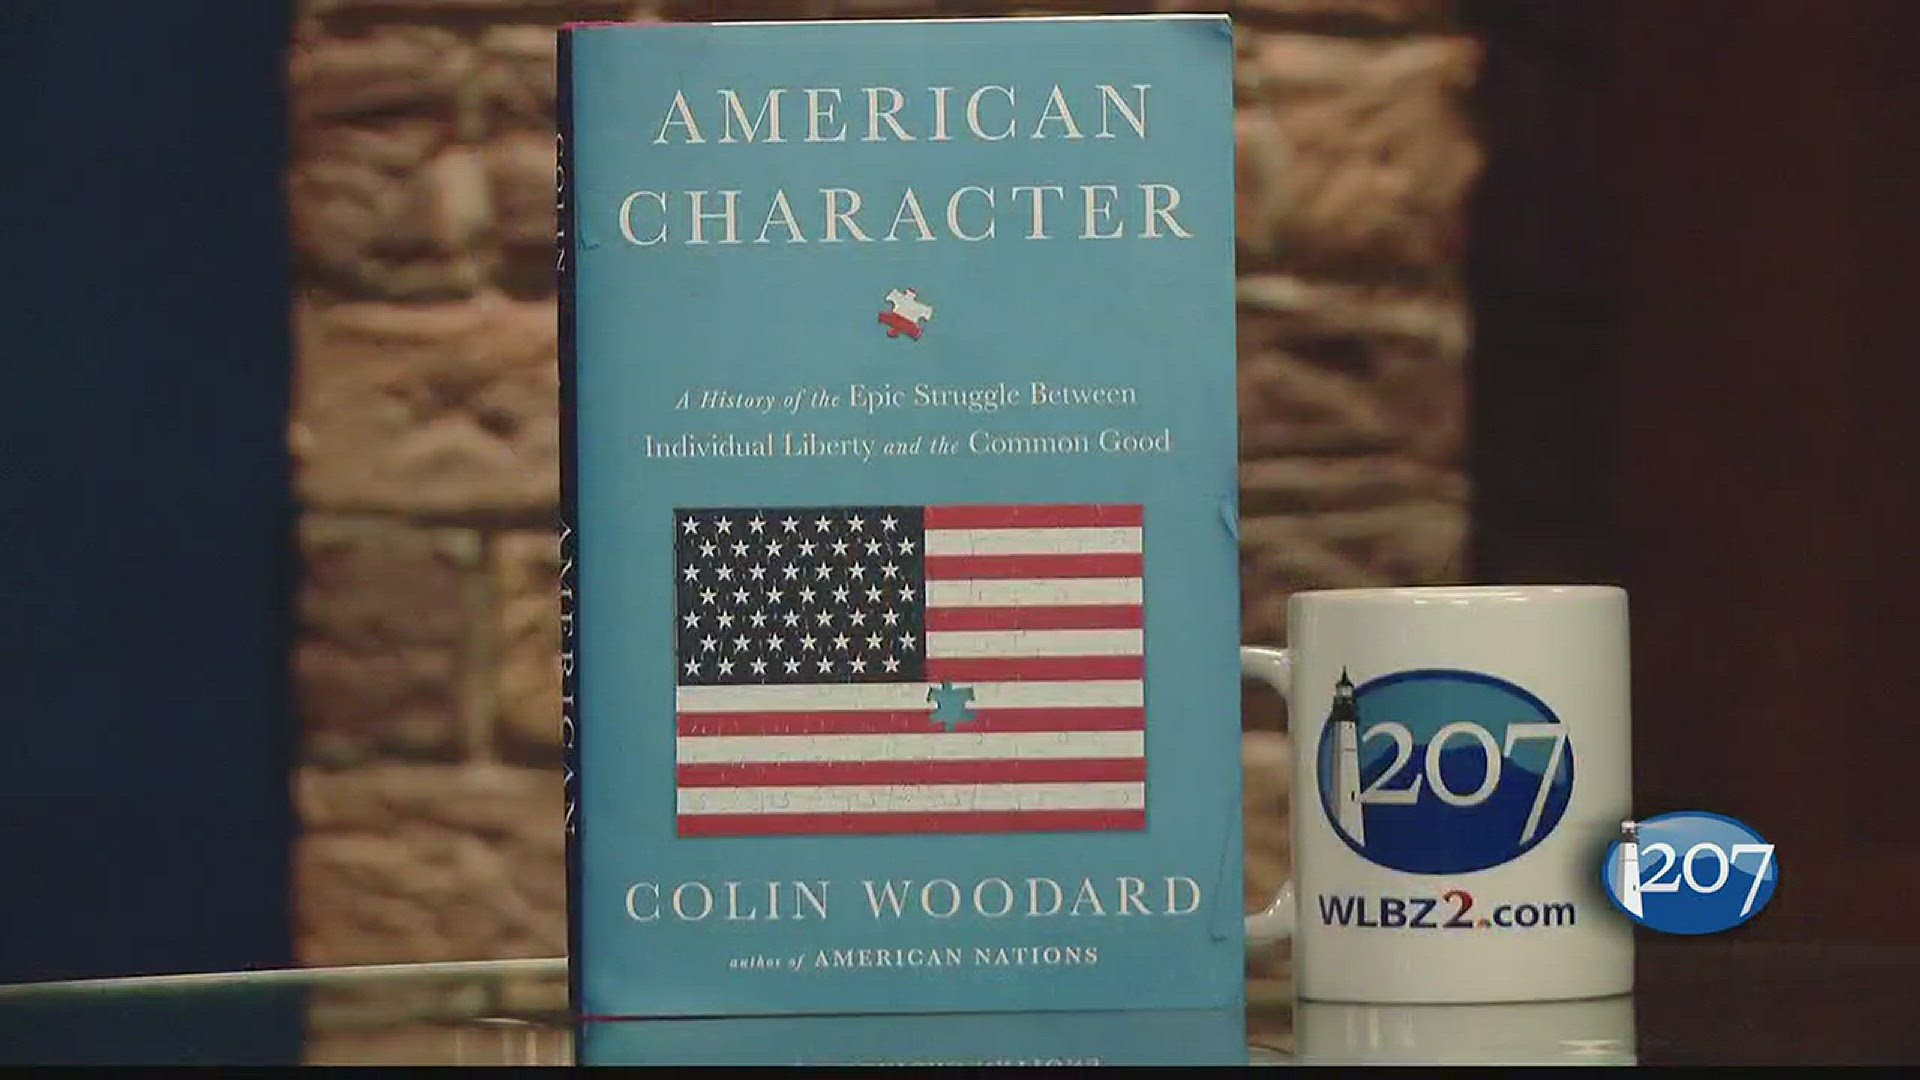 In "American Character: A History of the Epic Struggle Between Individual Liberty and the Common Good," author Colin Woodard explores how those two concepts - each integral to American identity - have shaped the country since the Pilgrims first landed.